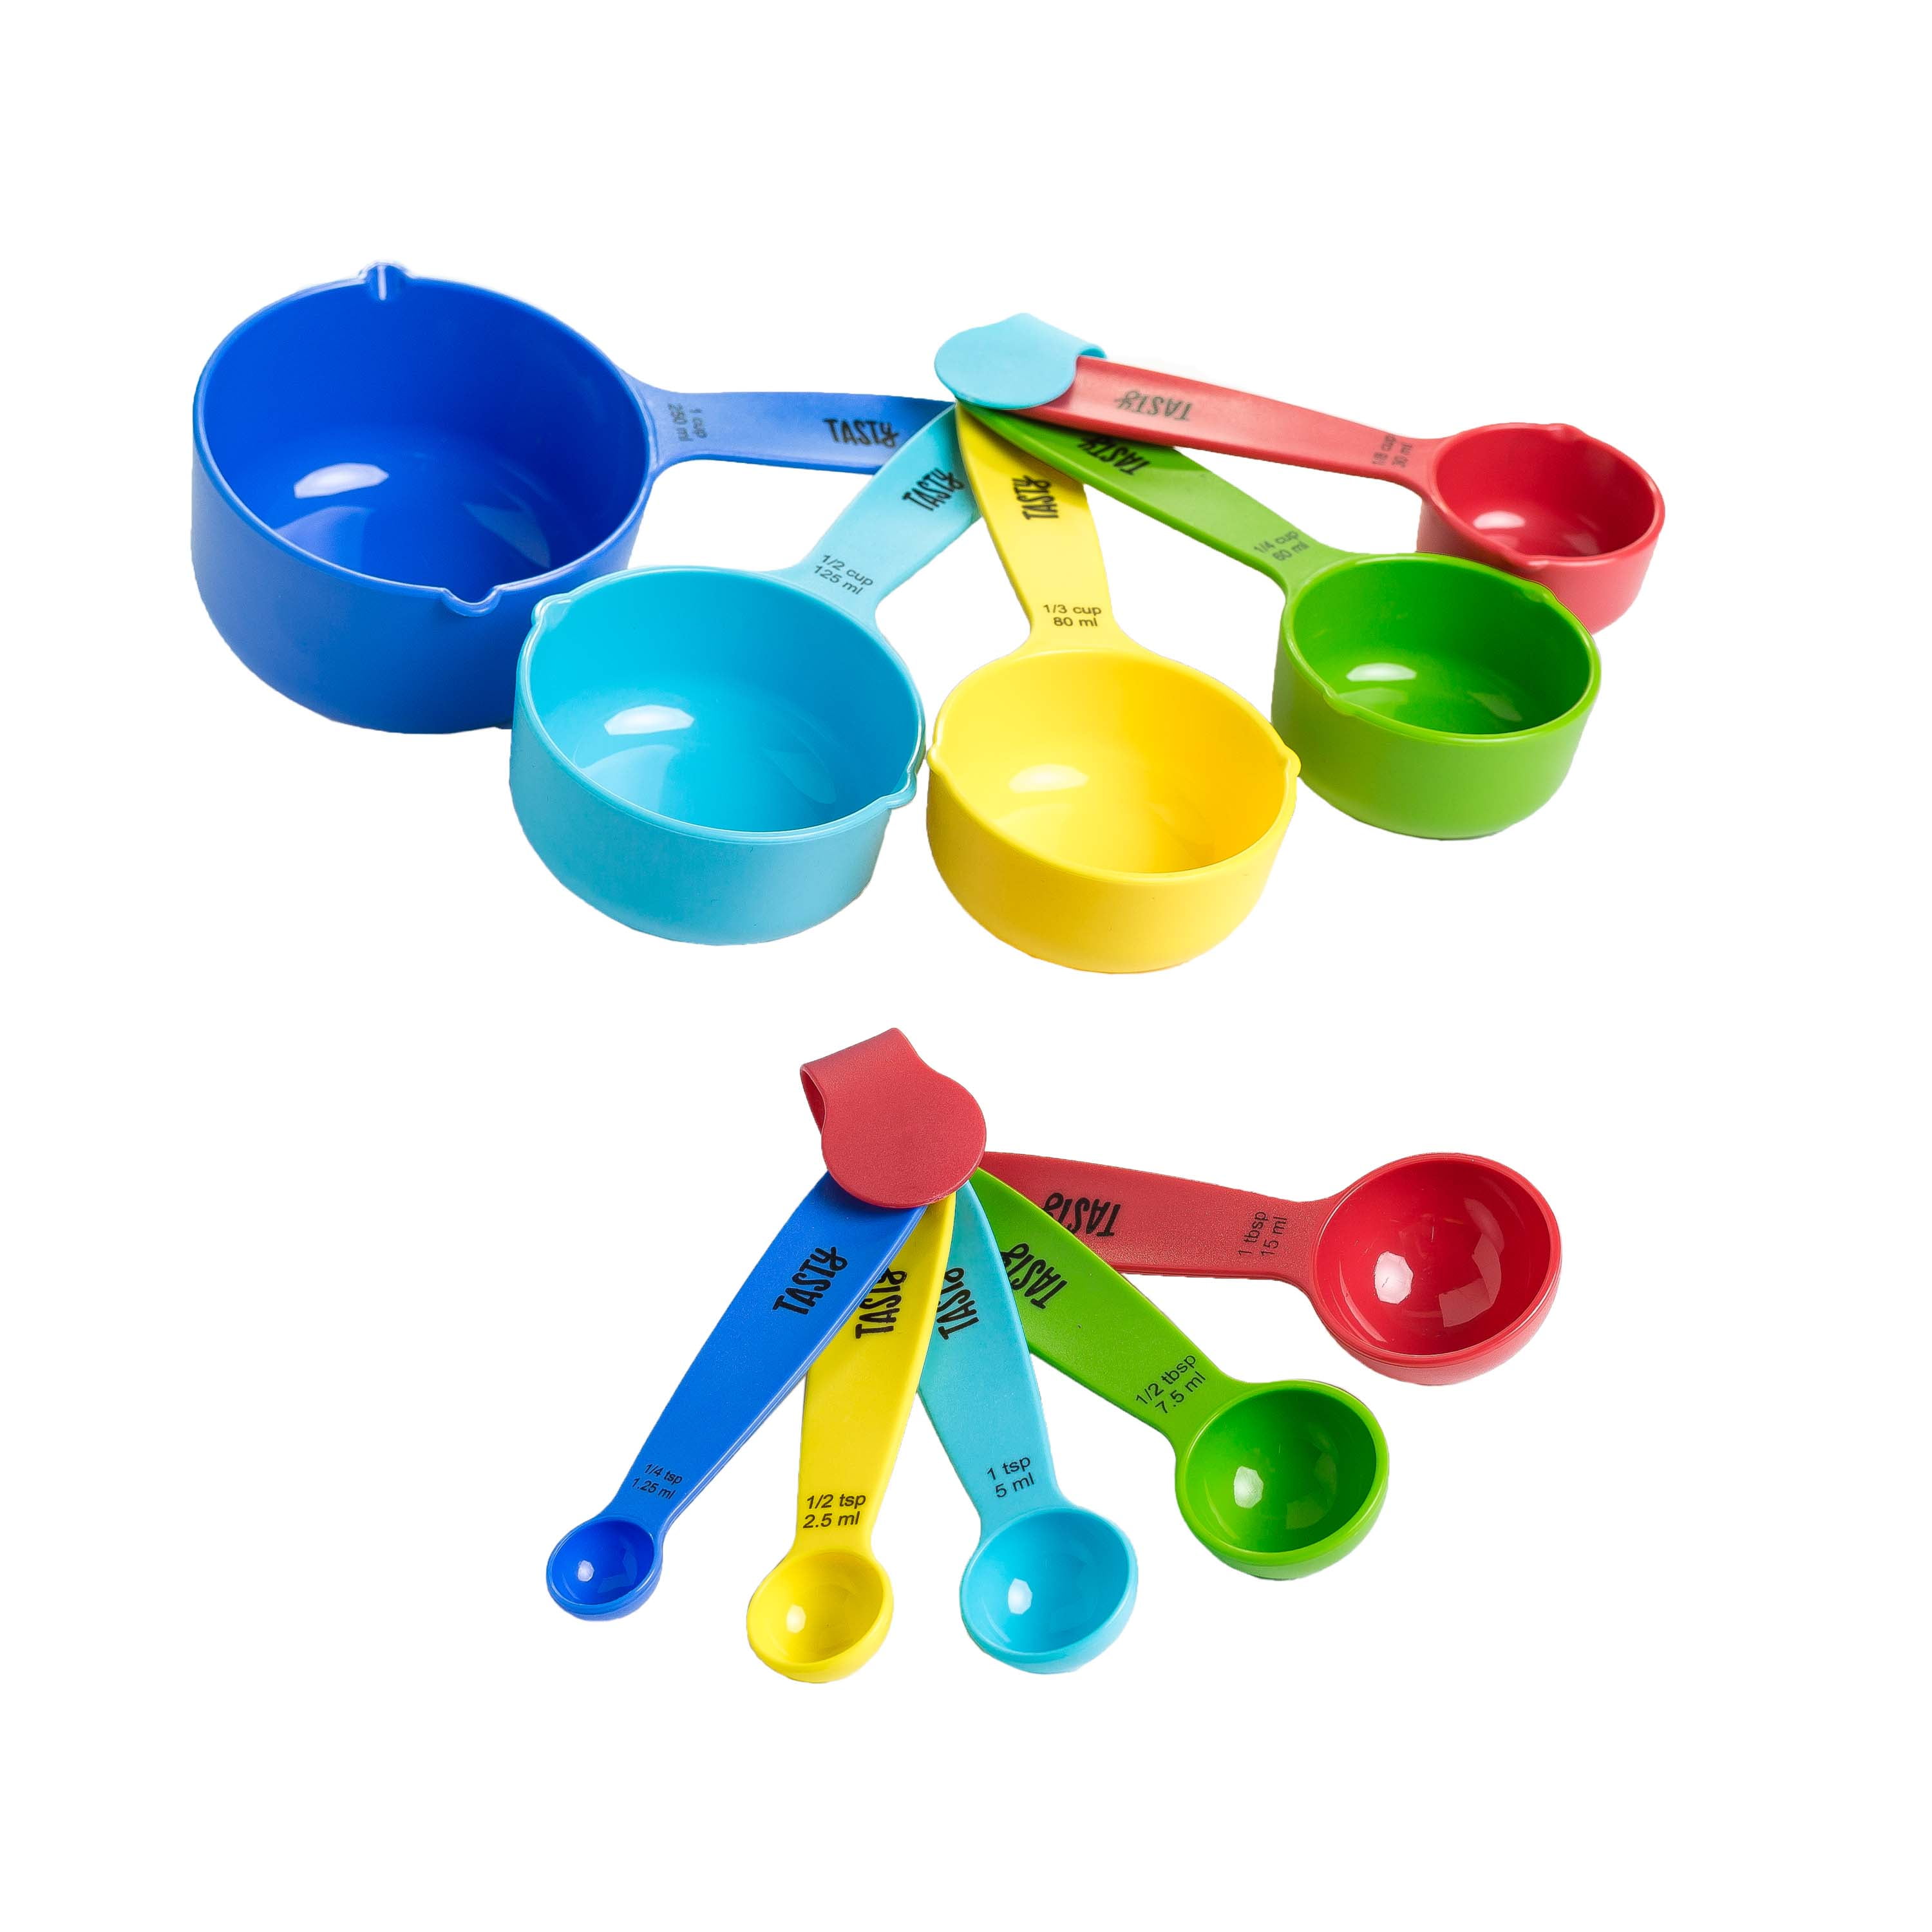 10pc Bamboo Fiber Measuring Cup and Spoon Set